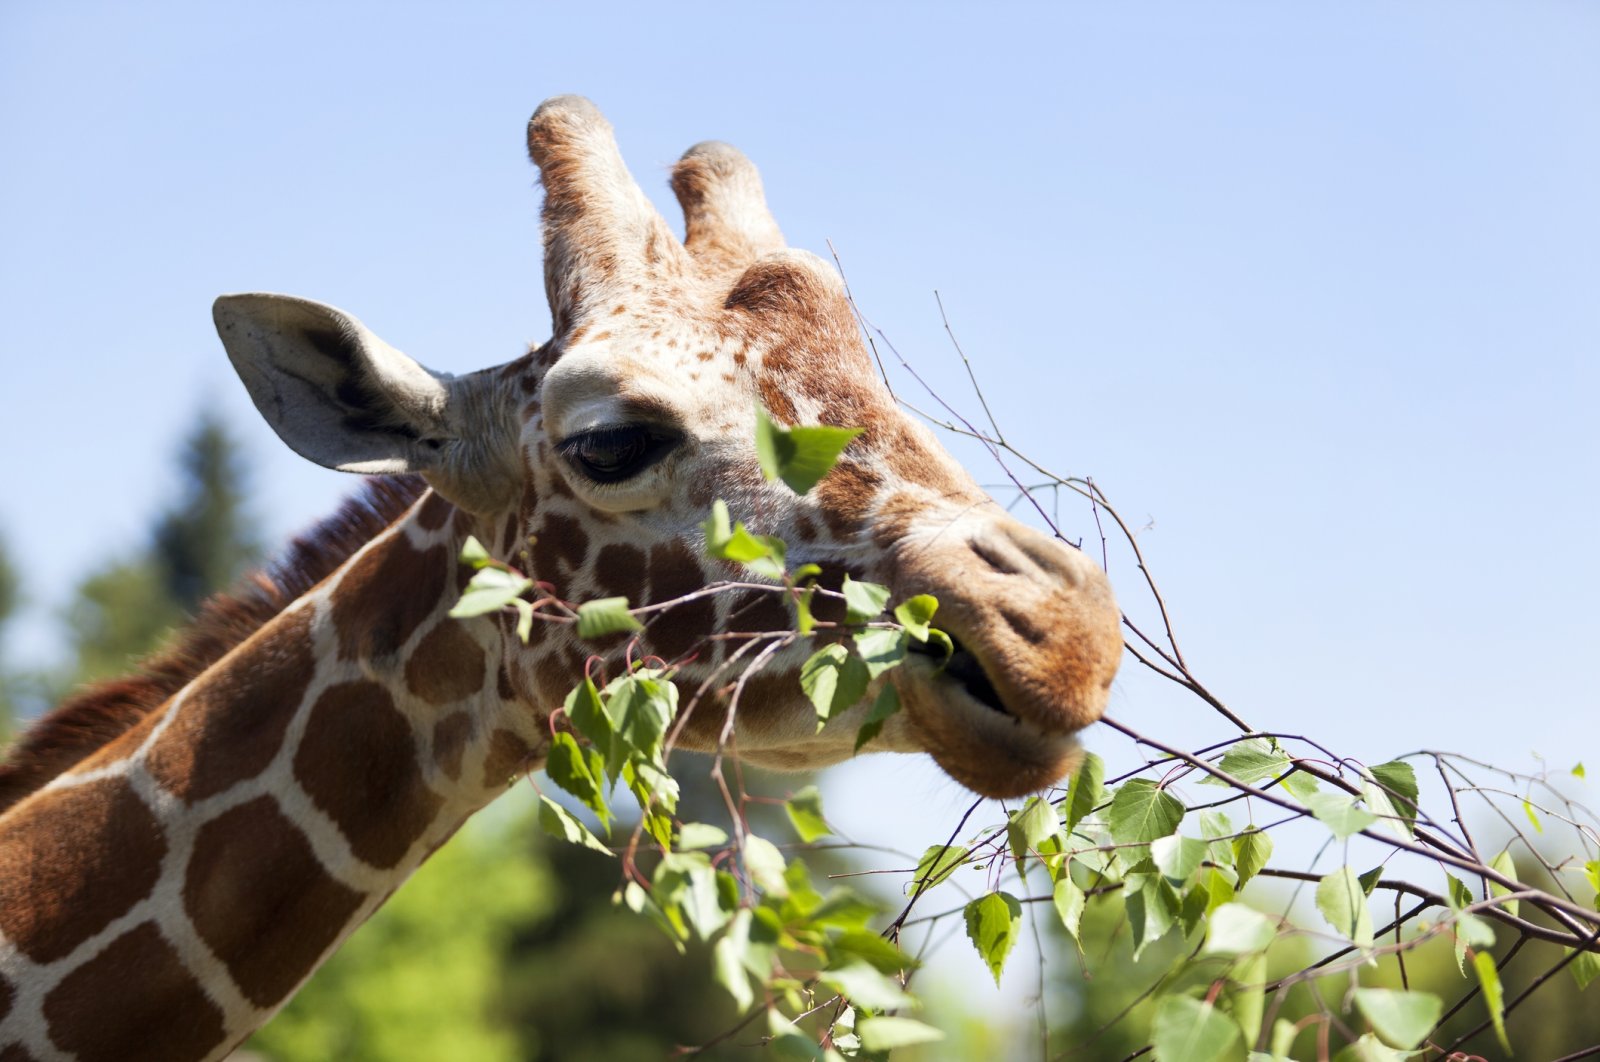 A giraffe eats leaves. (Getty Images Photo)